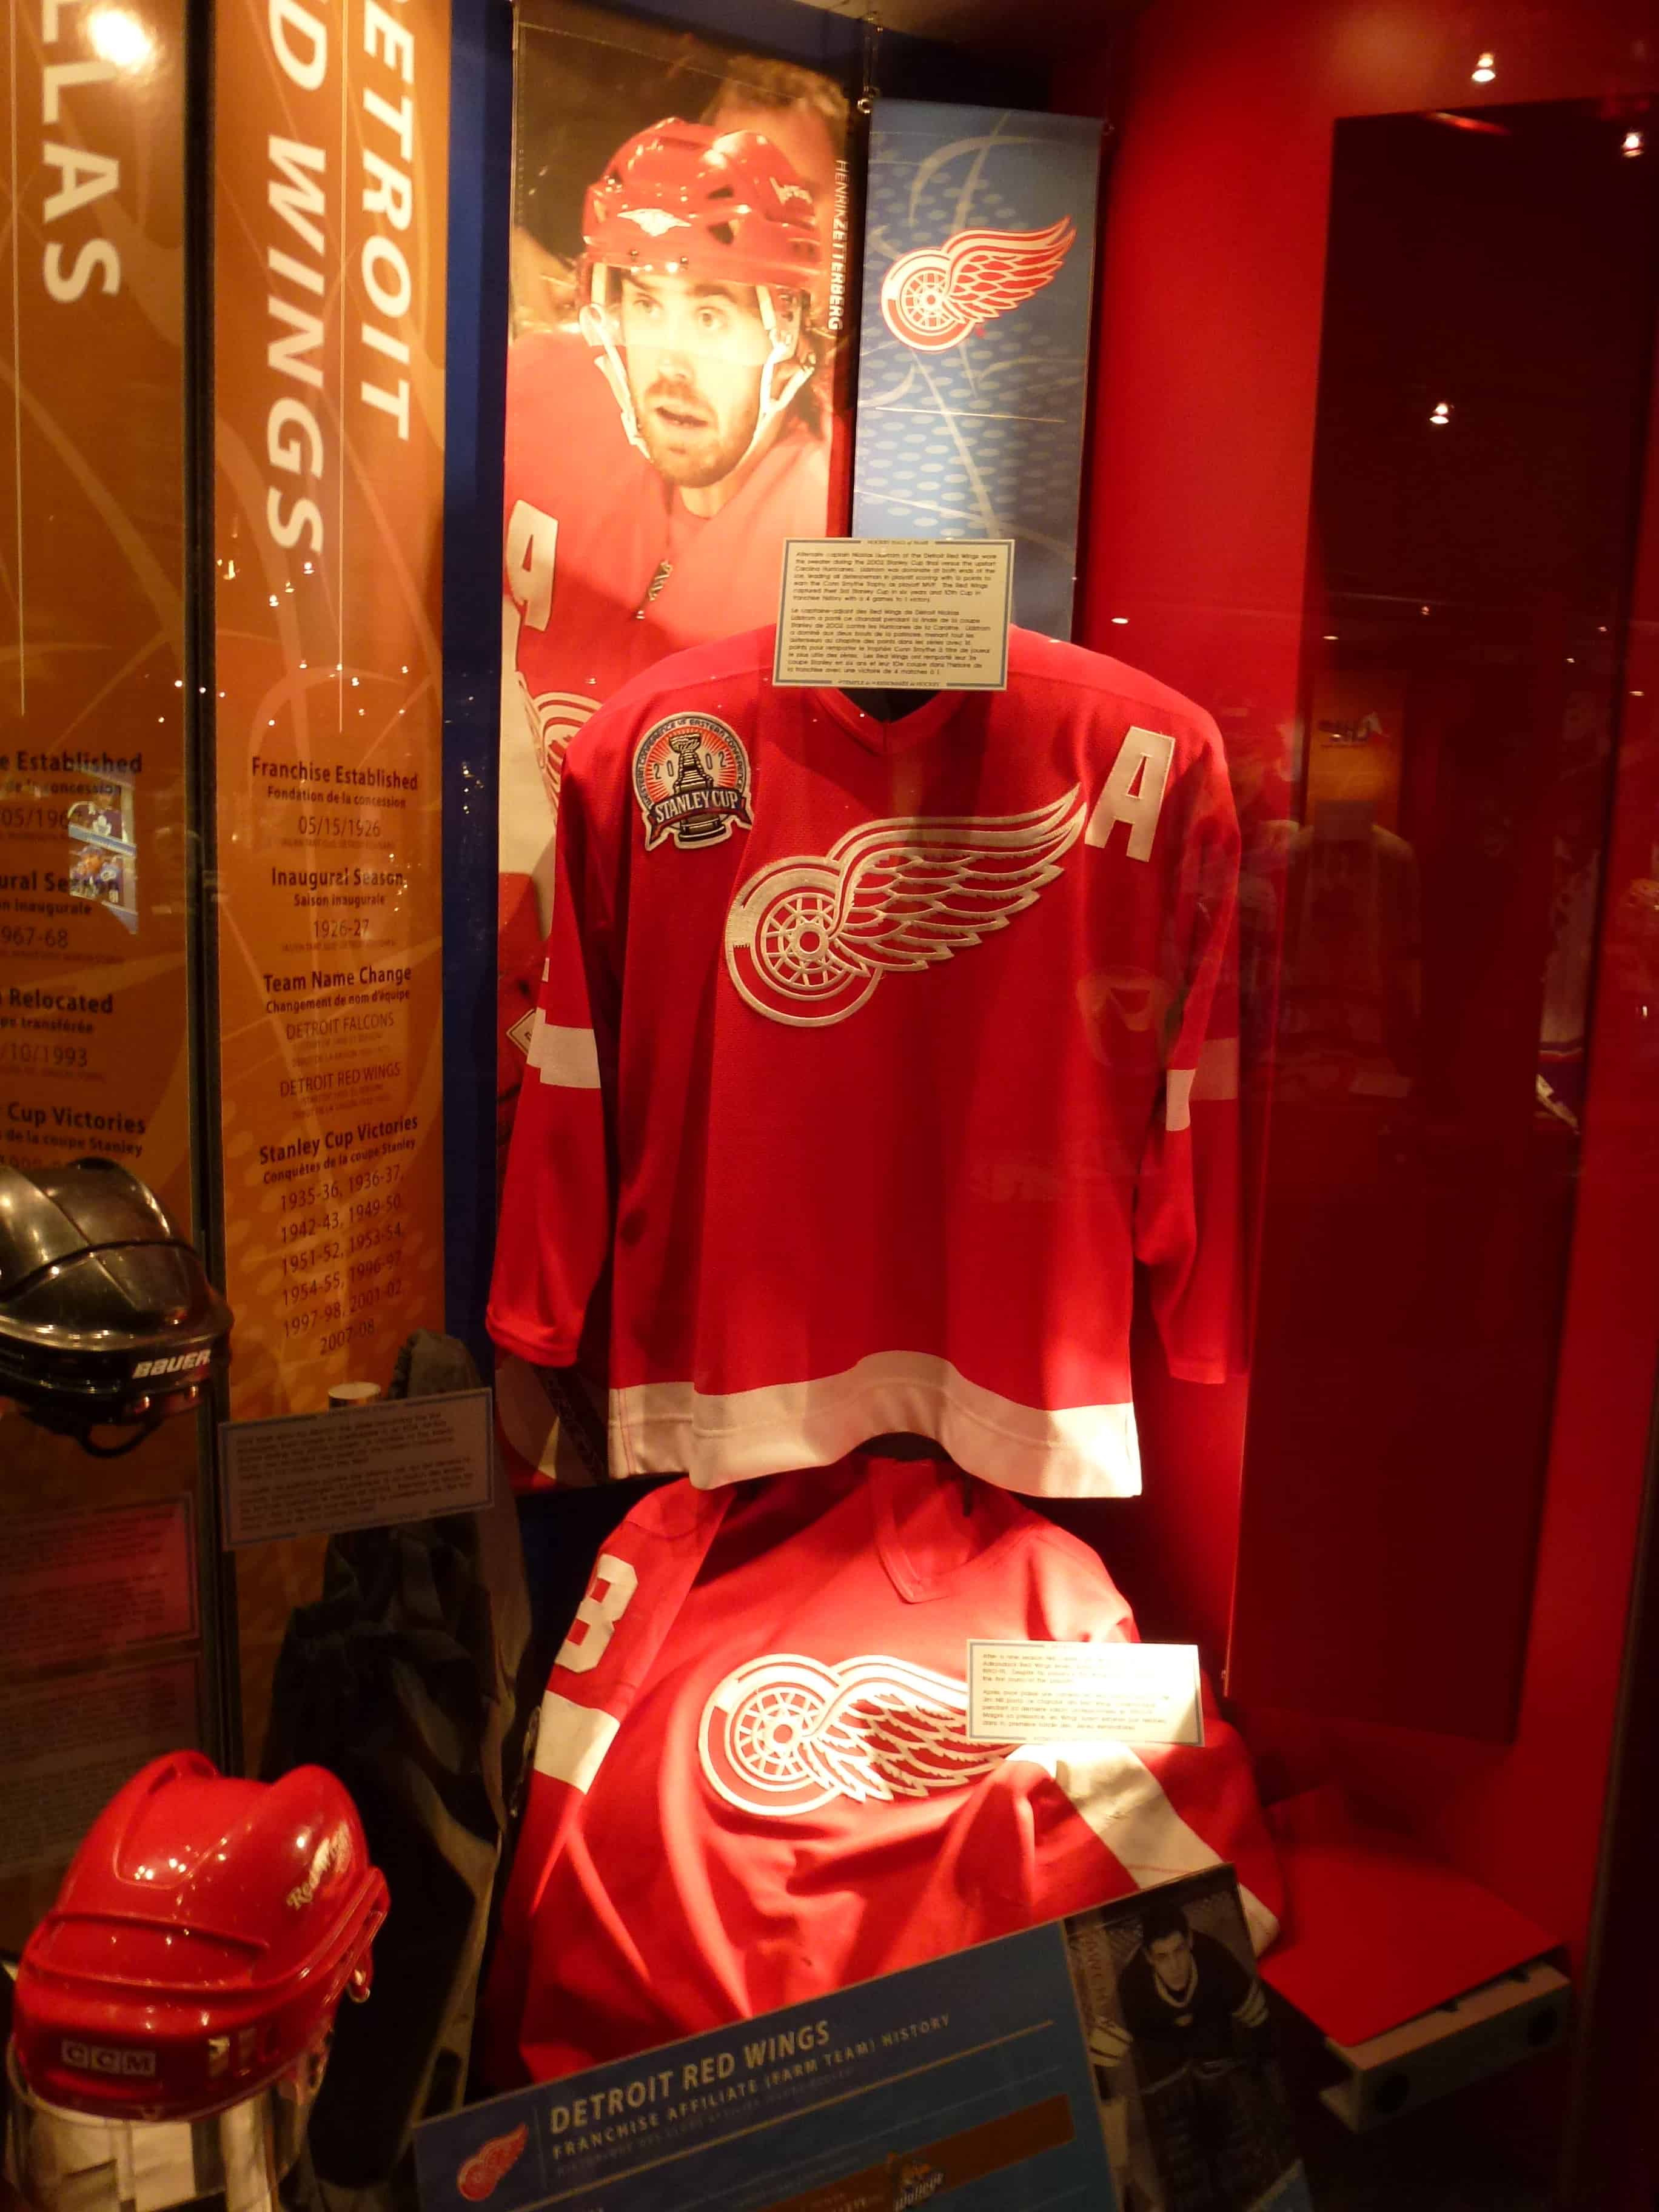 Detroit Red Wings team display at the Hockey Hall of Fame in Toronto, Ontario, Canada